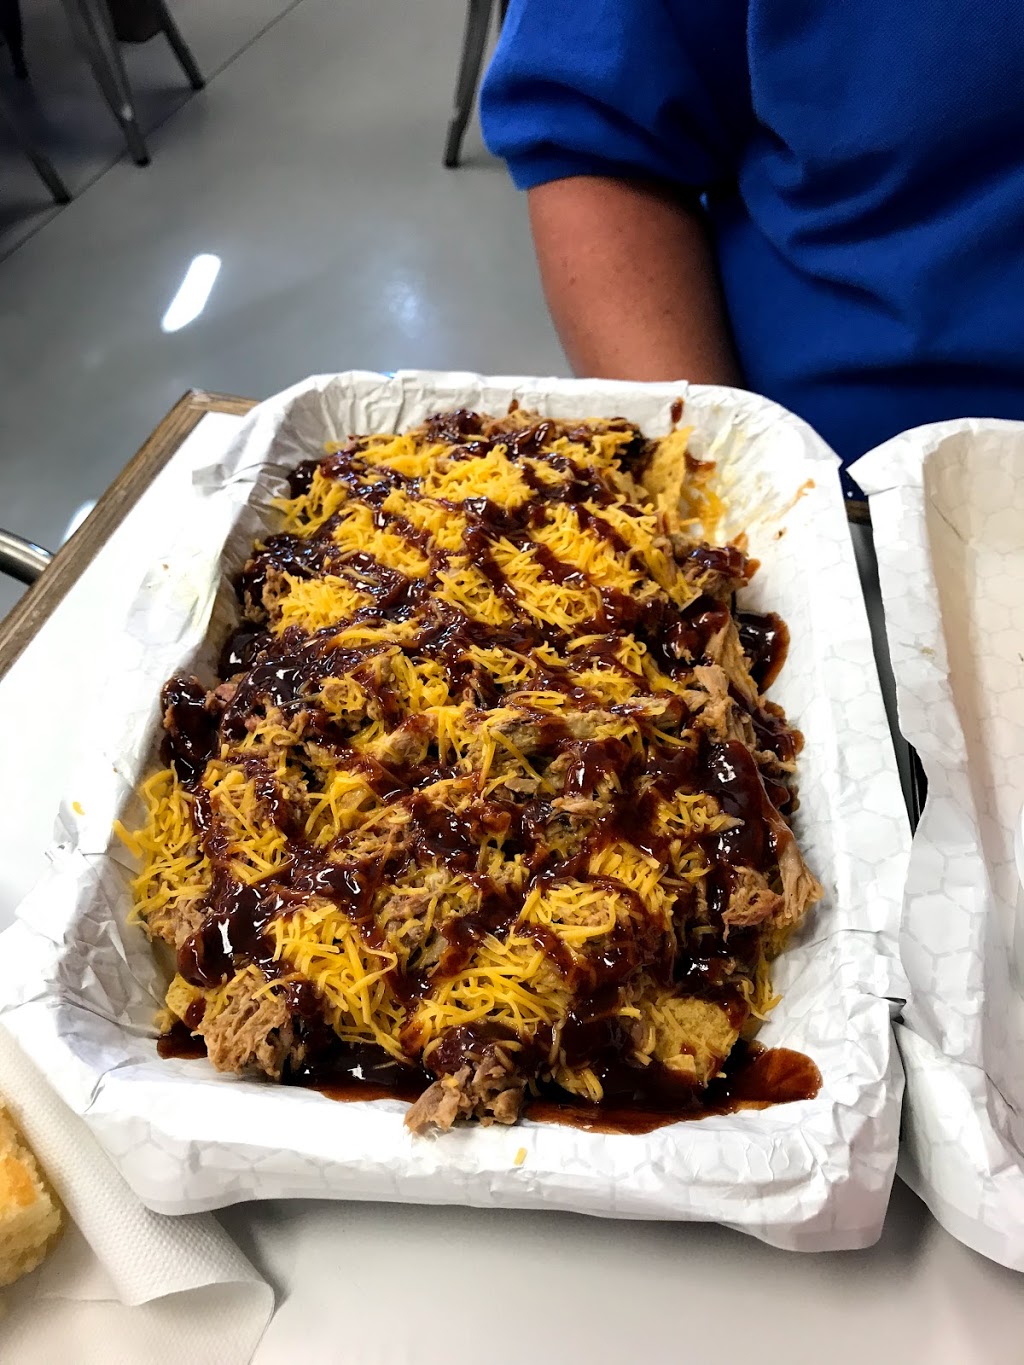 LDs BBQ | 2511 Main St, East Troy, WI 53120 | Phone: (414) 610-7675